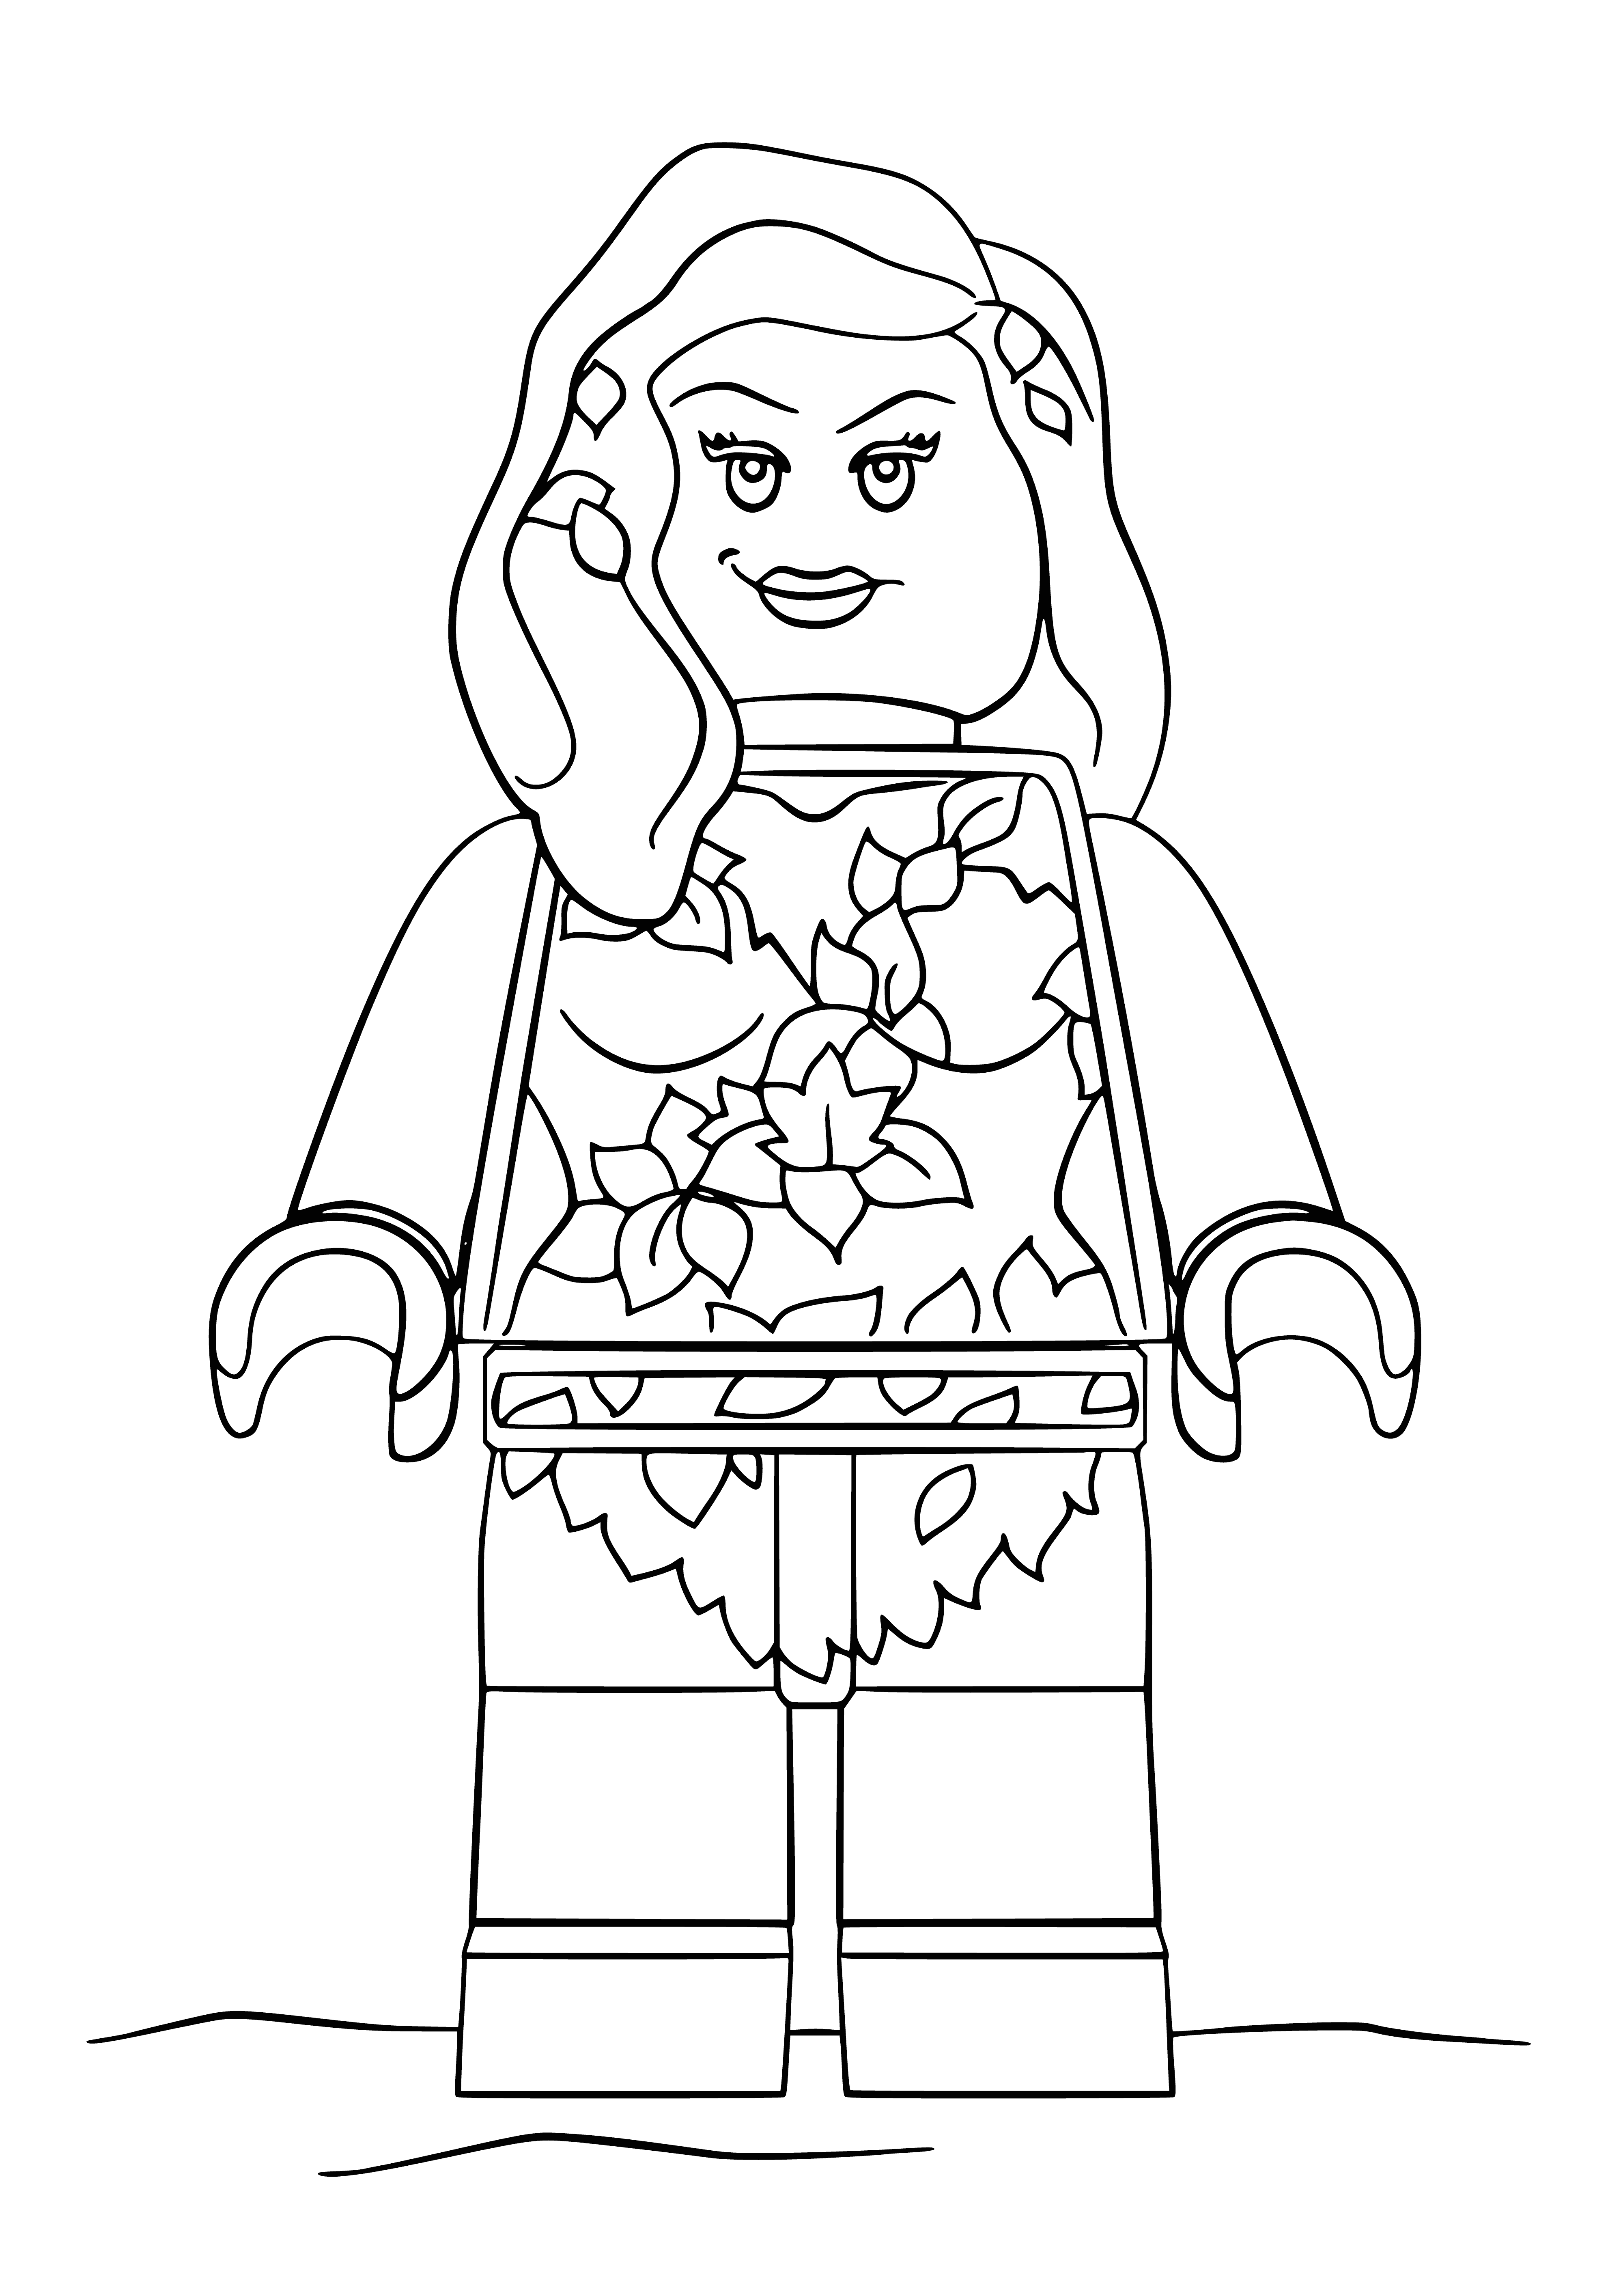 coloring page: LEGO Batman stands on green base, holding black batarang, with purple-flowered plant nearby, leaves green, stem purple. #LEGO